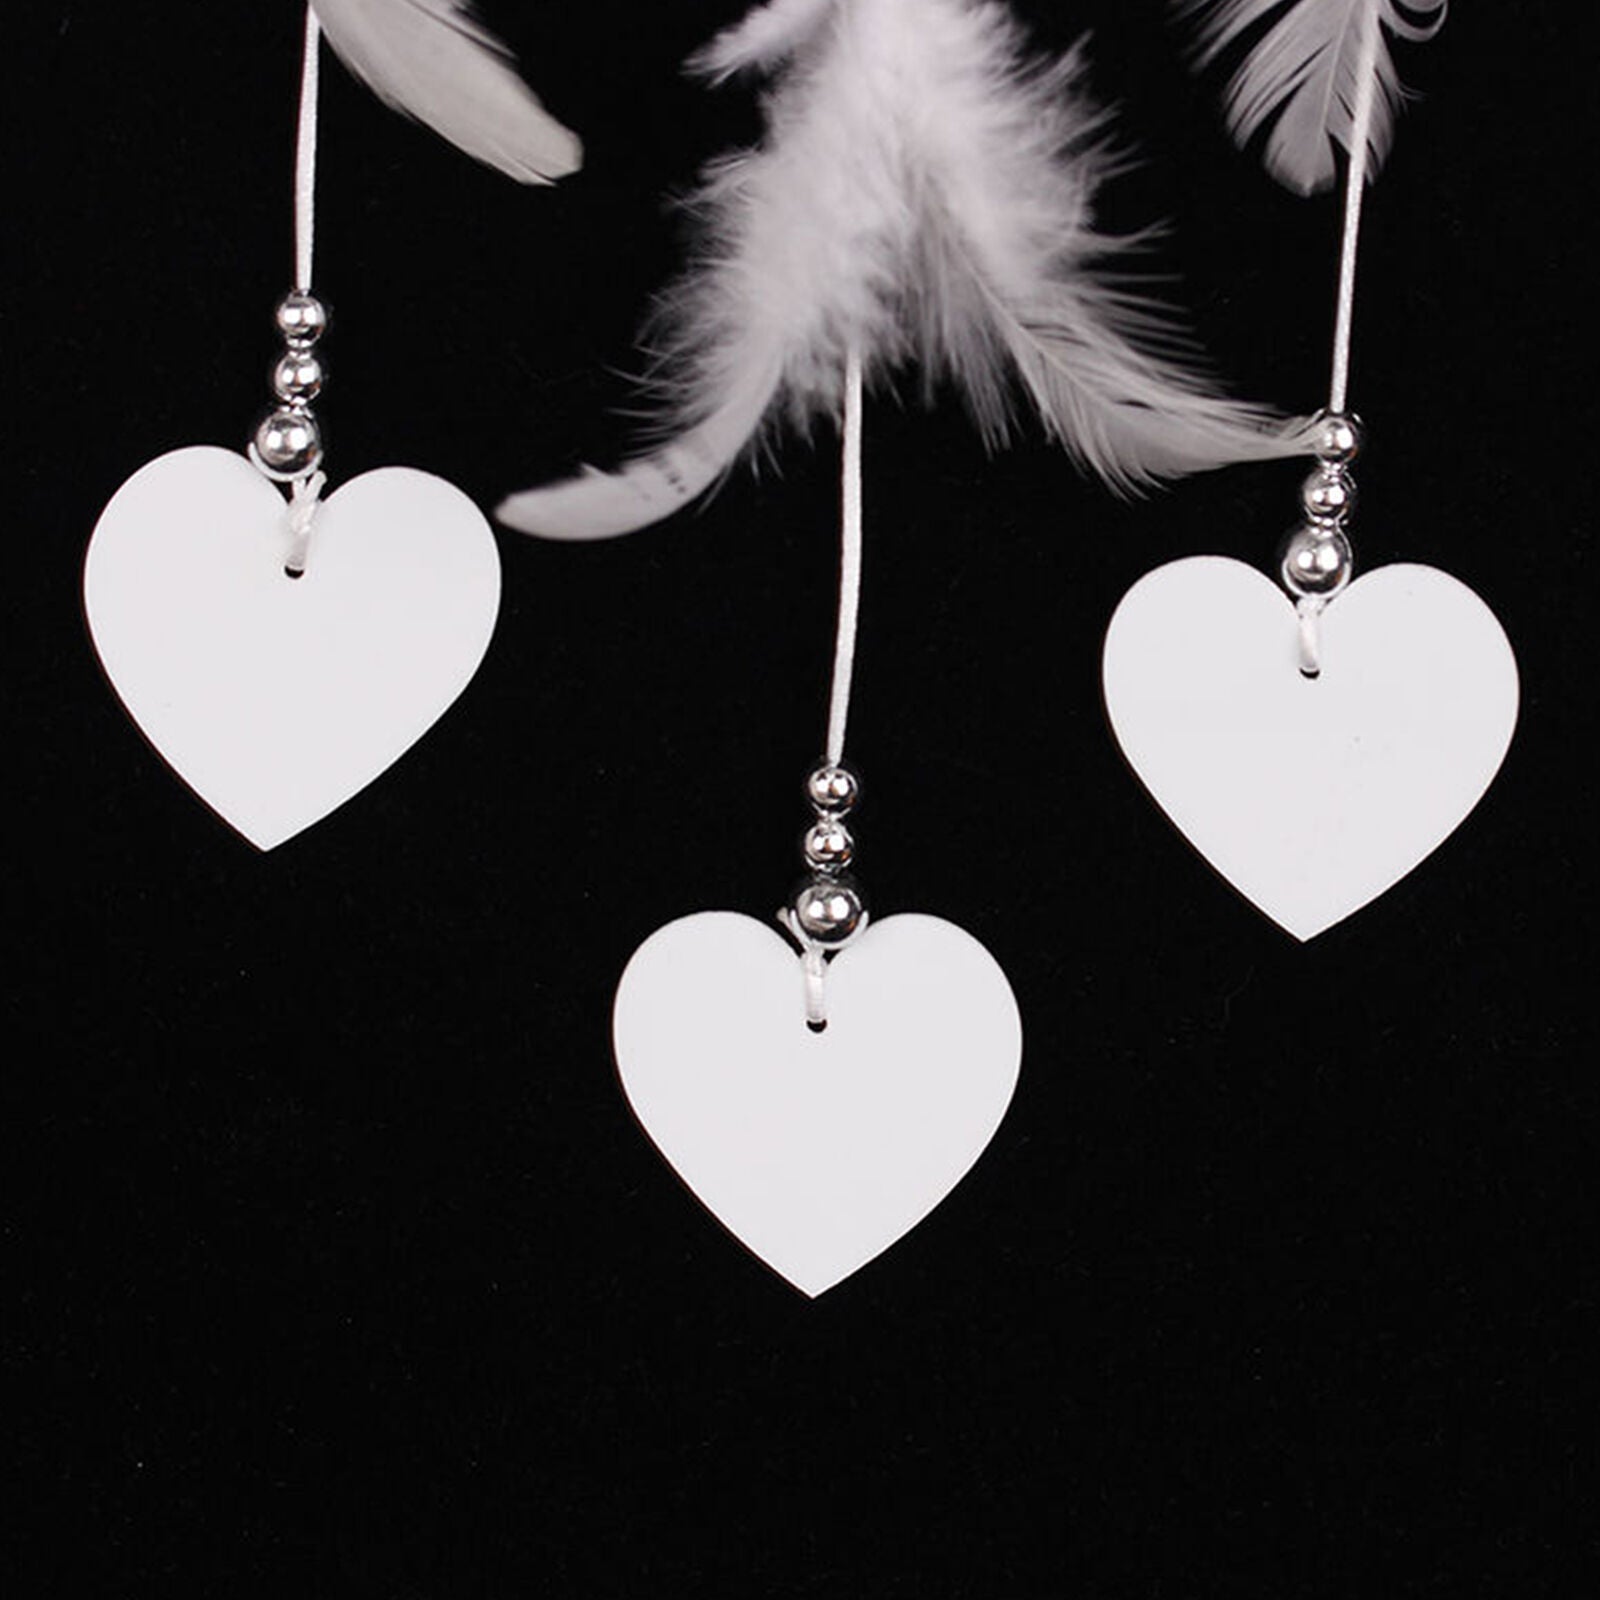 White New Dream Catcher With Feather Small Heart Wall hanging Home Car Decor